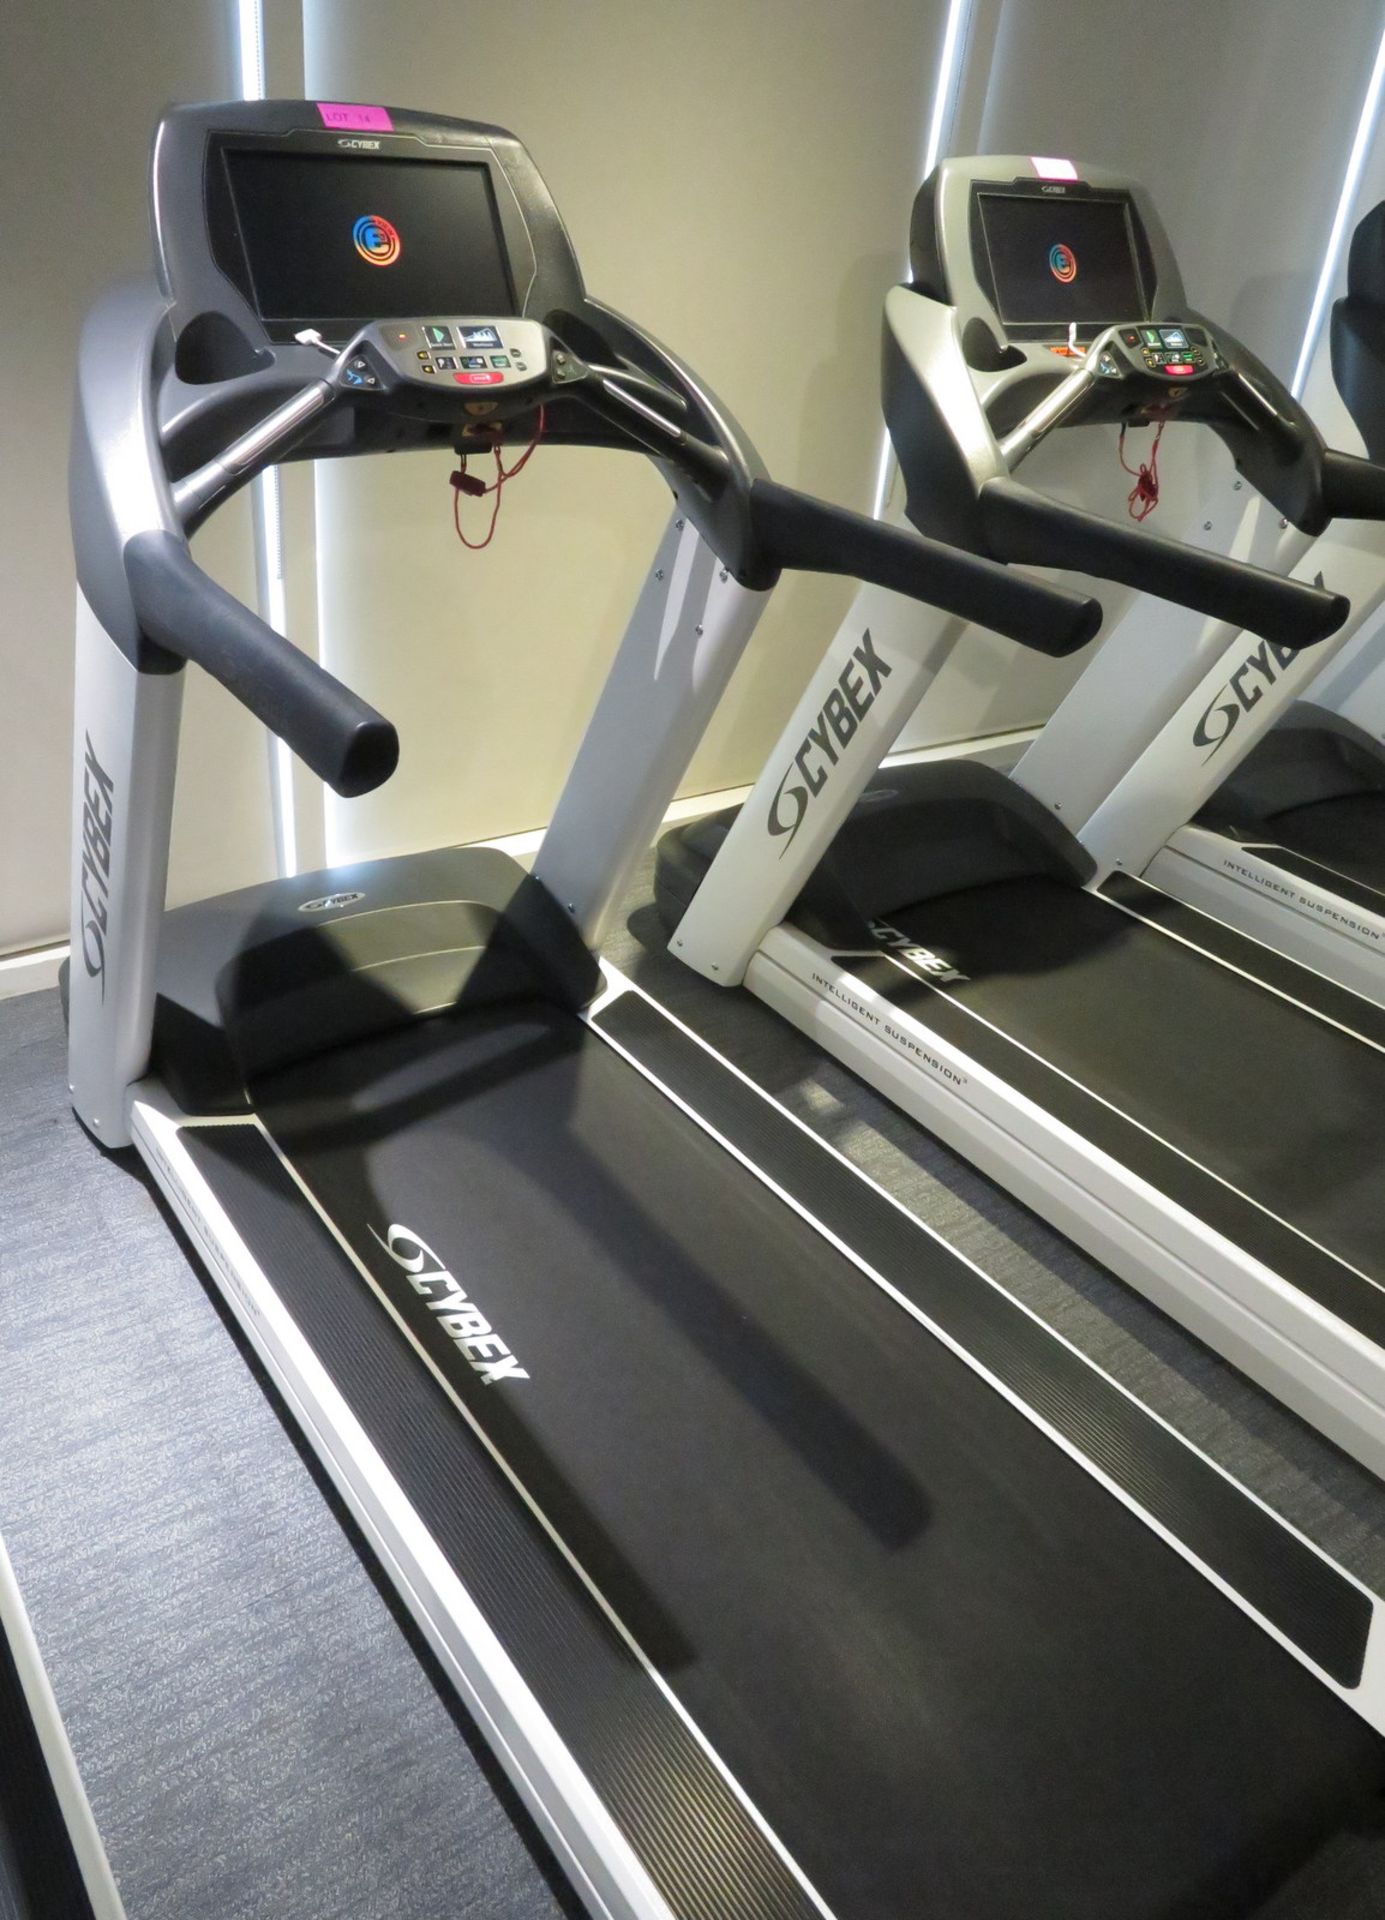 Cybex Treadmill Model: 625T, Working Condition With TV Display Monitor. - Image 3 of 9